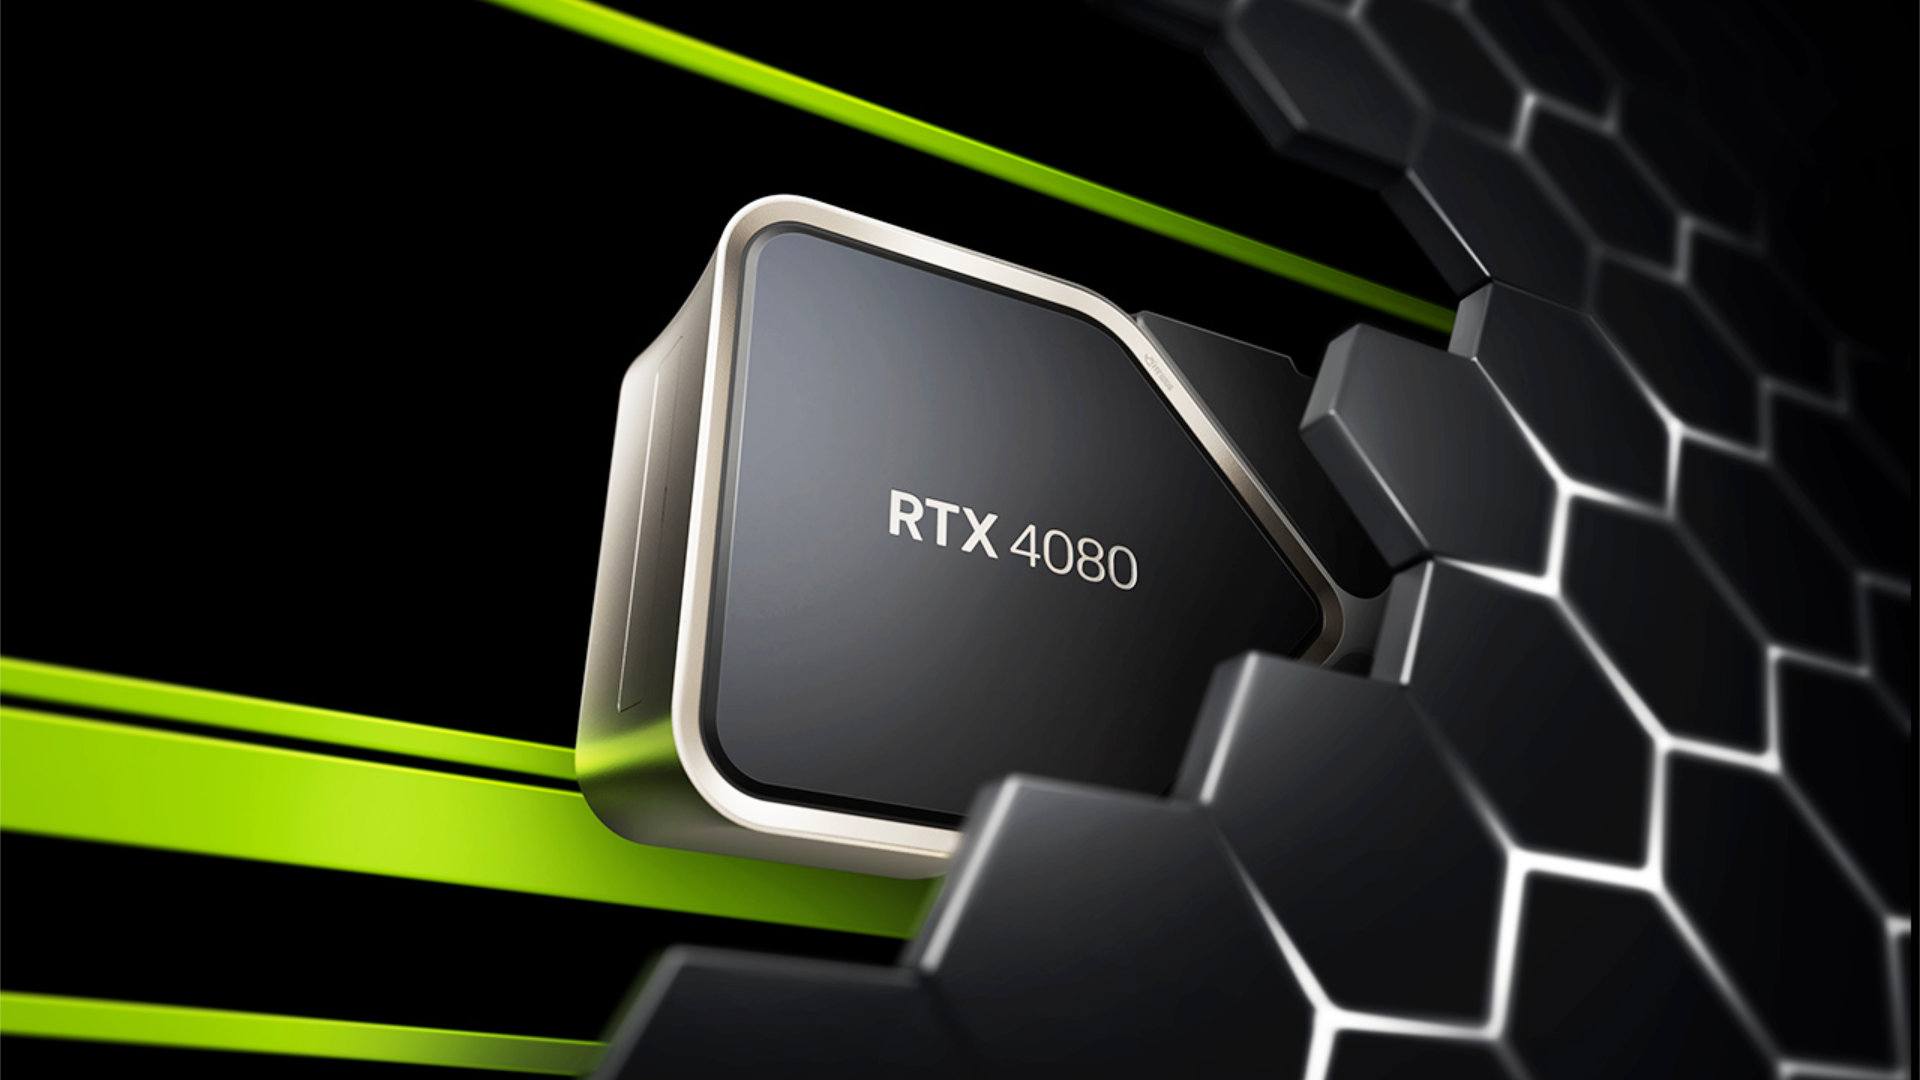 Nvidia GeForce Now gets RTX 4080 tier and works in cars